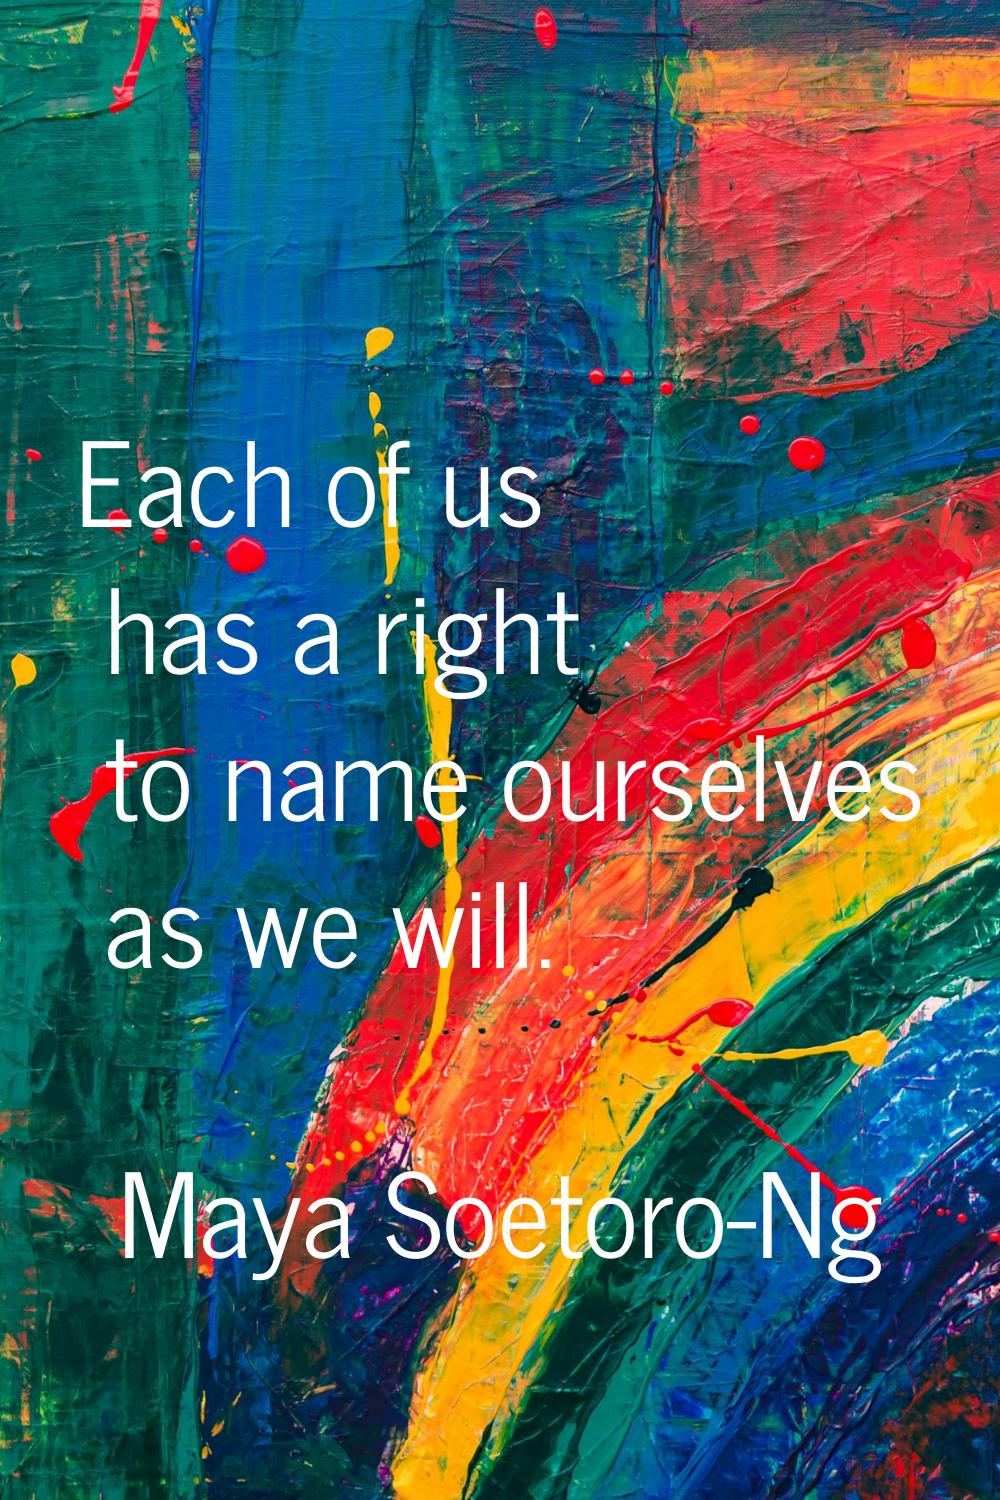 Each of us has a right to name ourselves as we will.